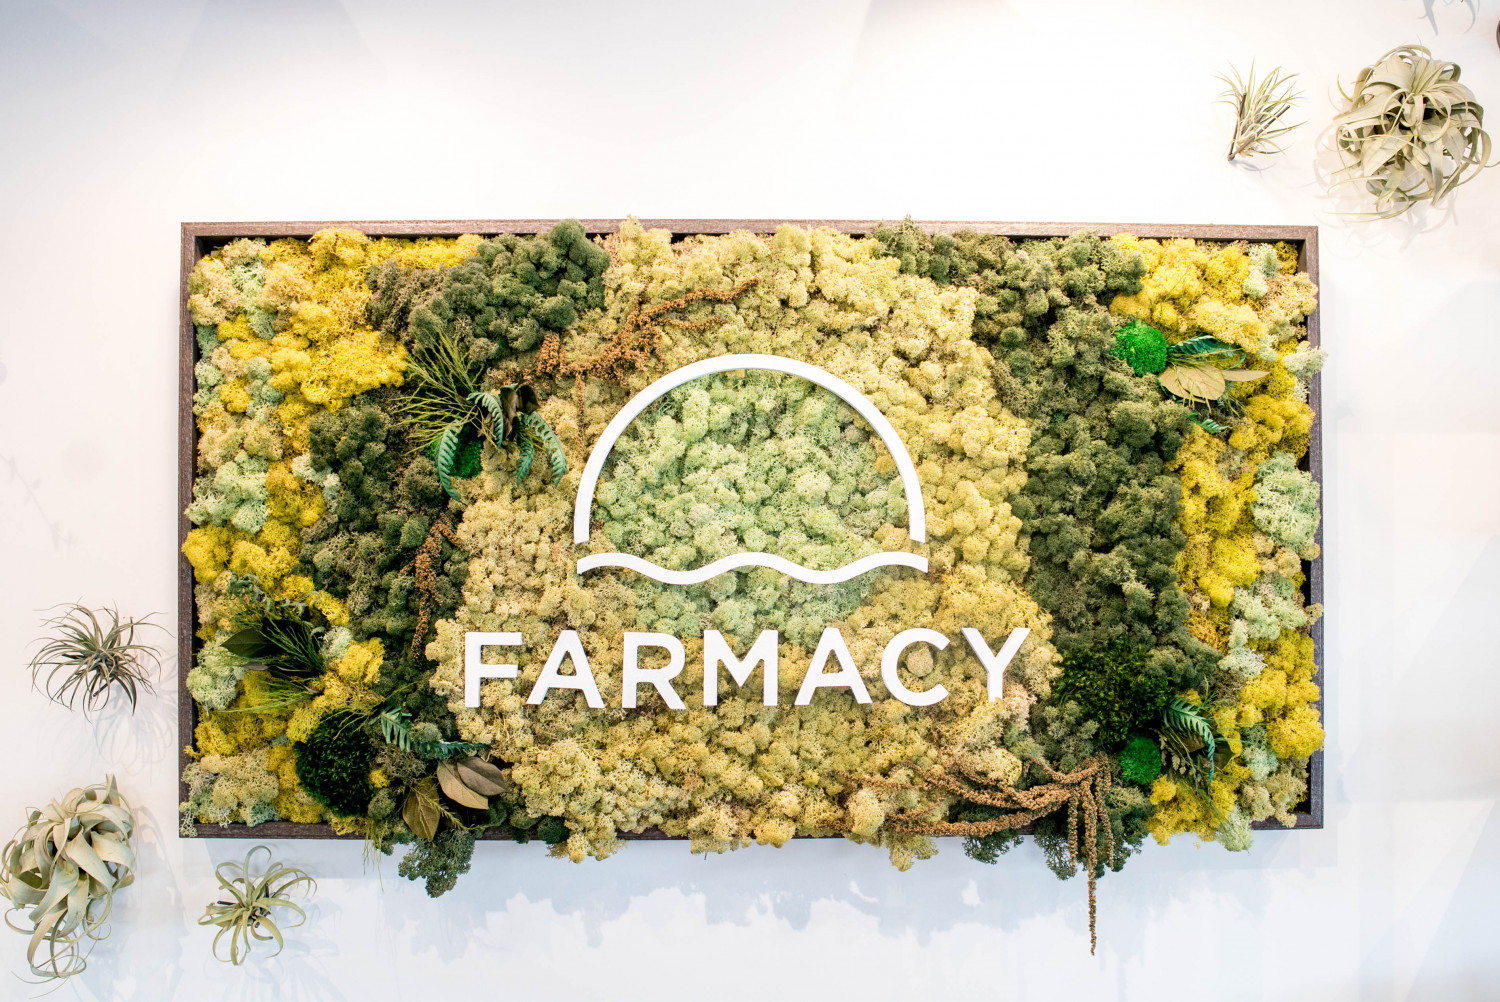 The Farmacy Is Committed To Providing A Service Over Sales Experience For Santa Barbara's Cannabis Community